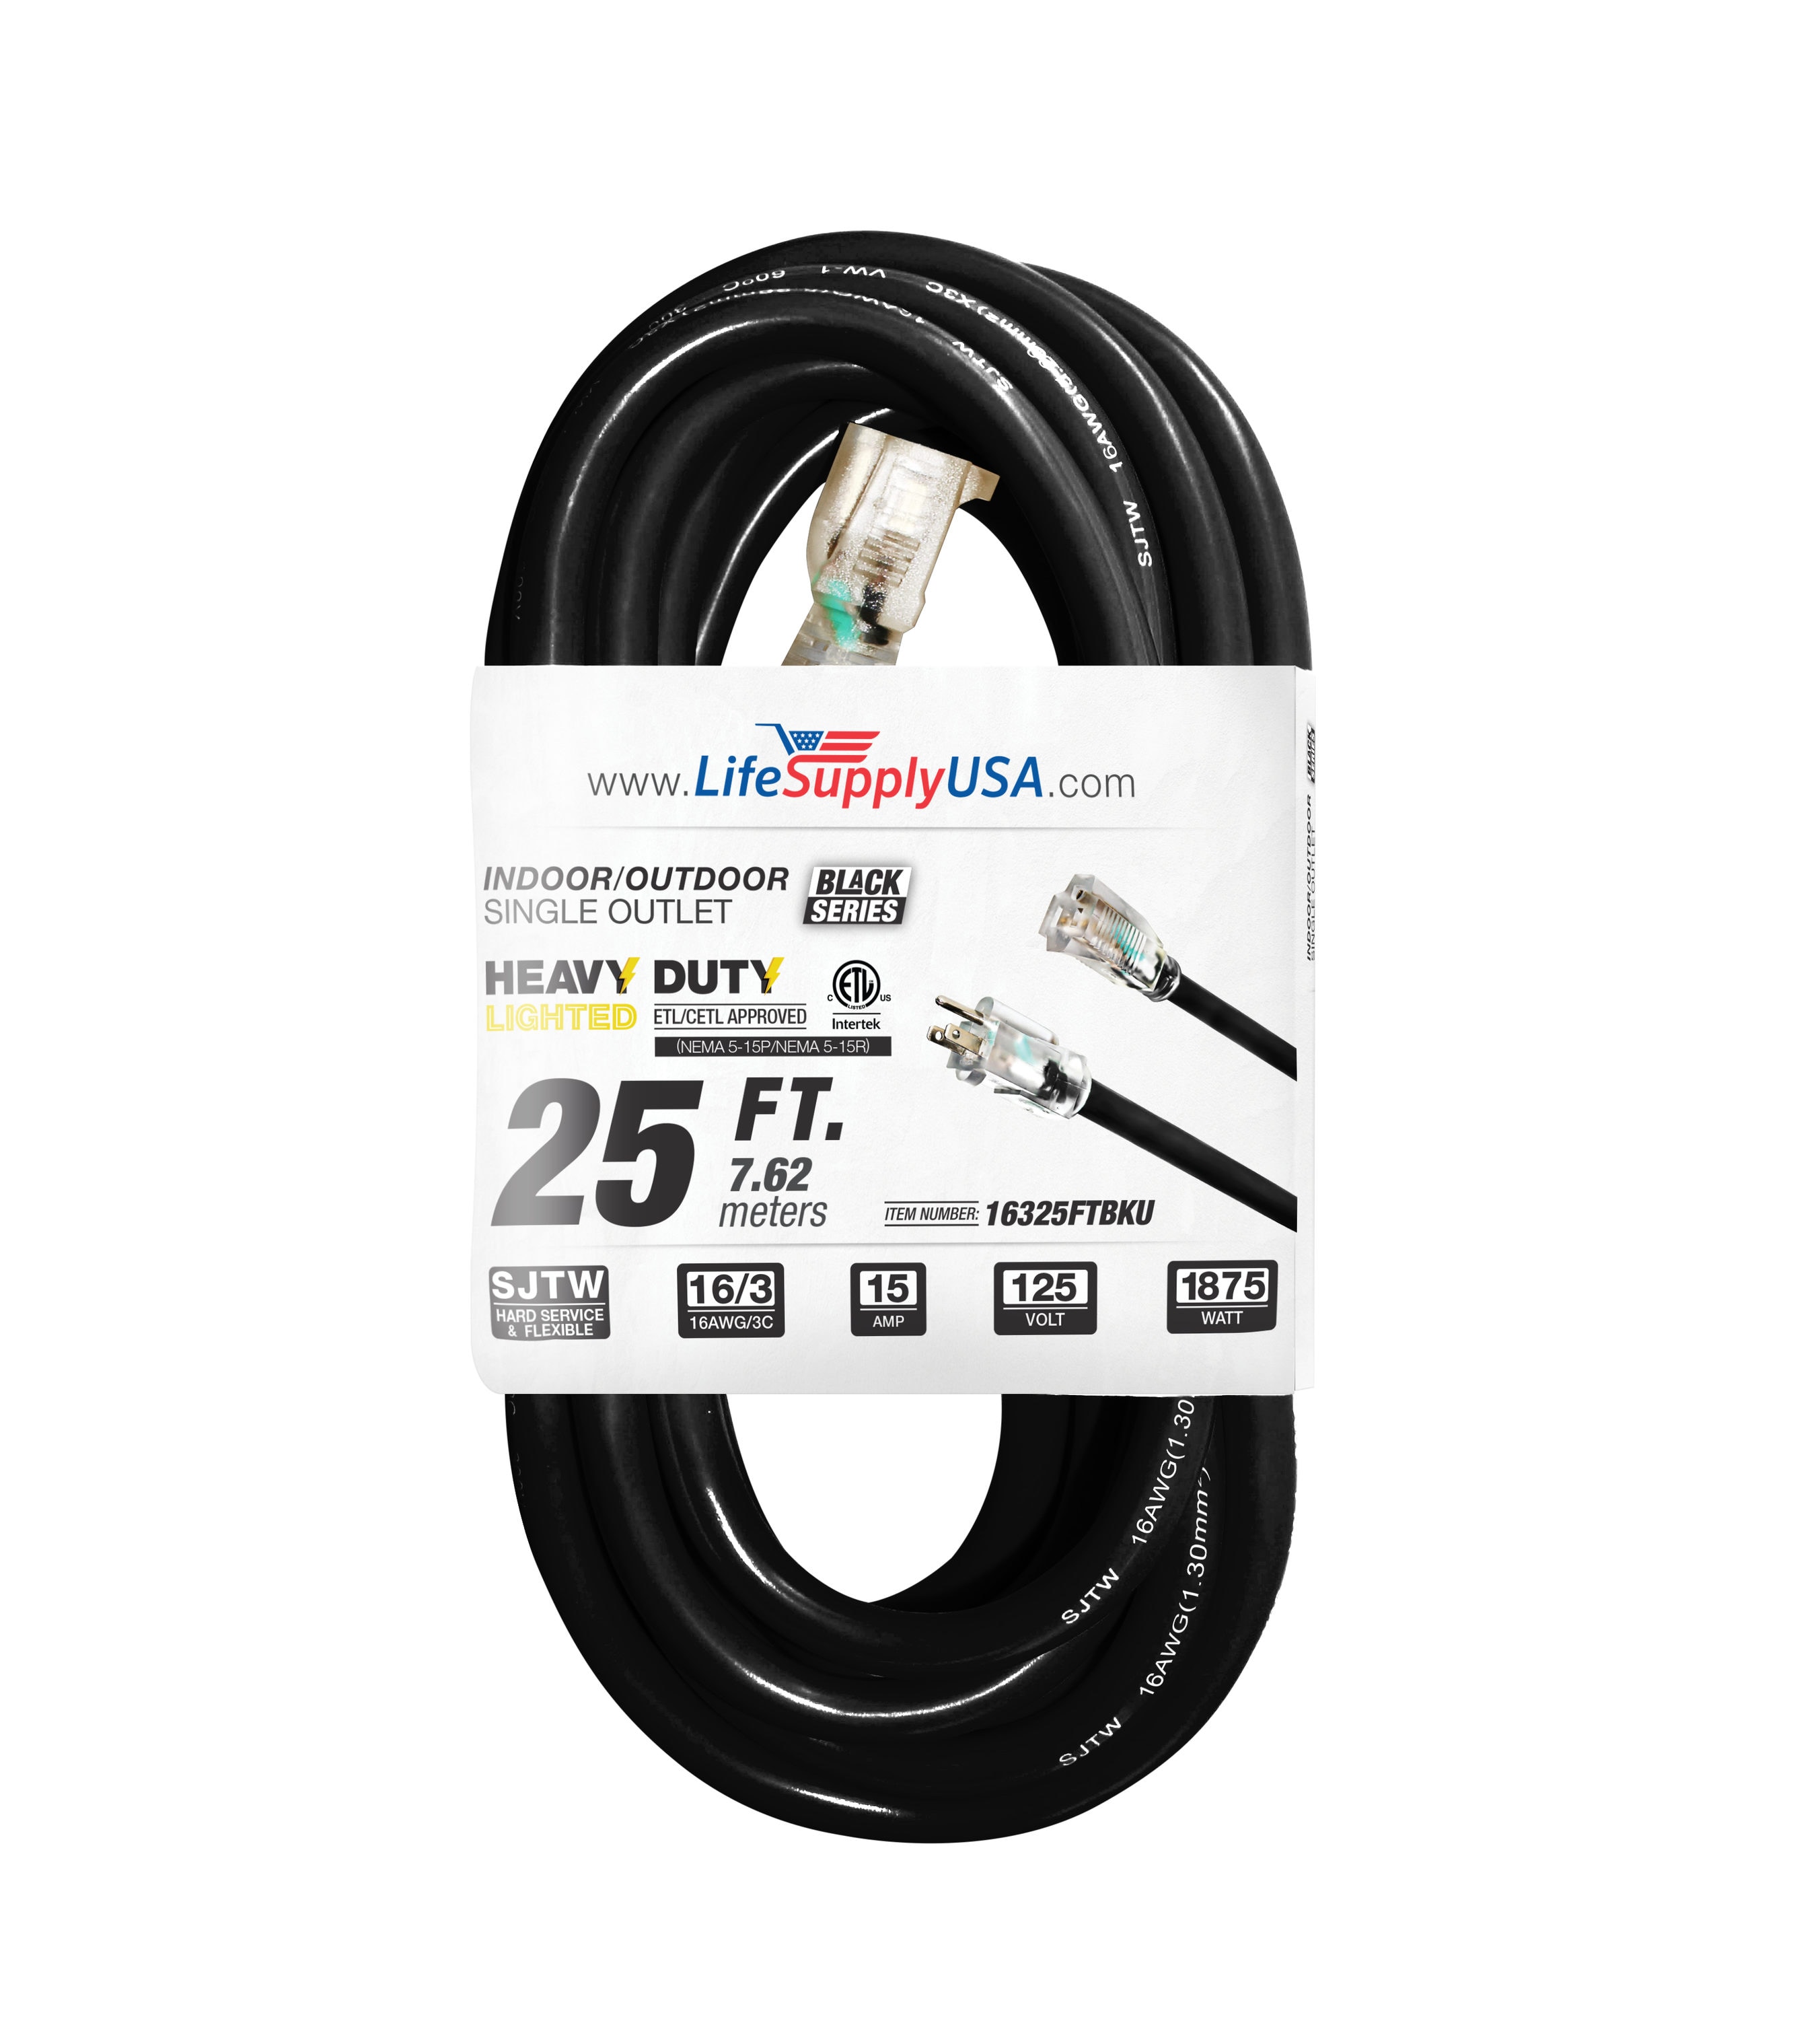 LifeSupplyUSA 25-ft 16/3-Prong Indoor/Outdoor Sjtw Heavy Duty Lighted  Extension Cord